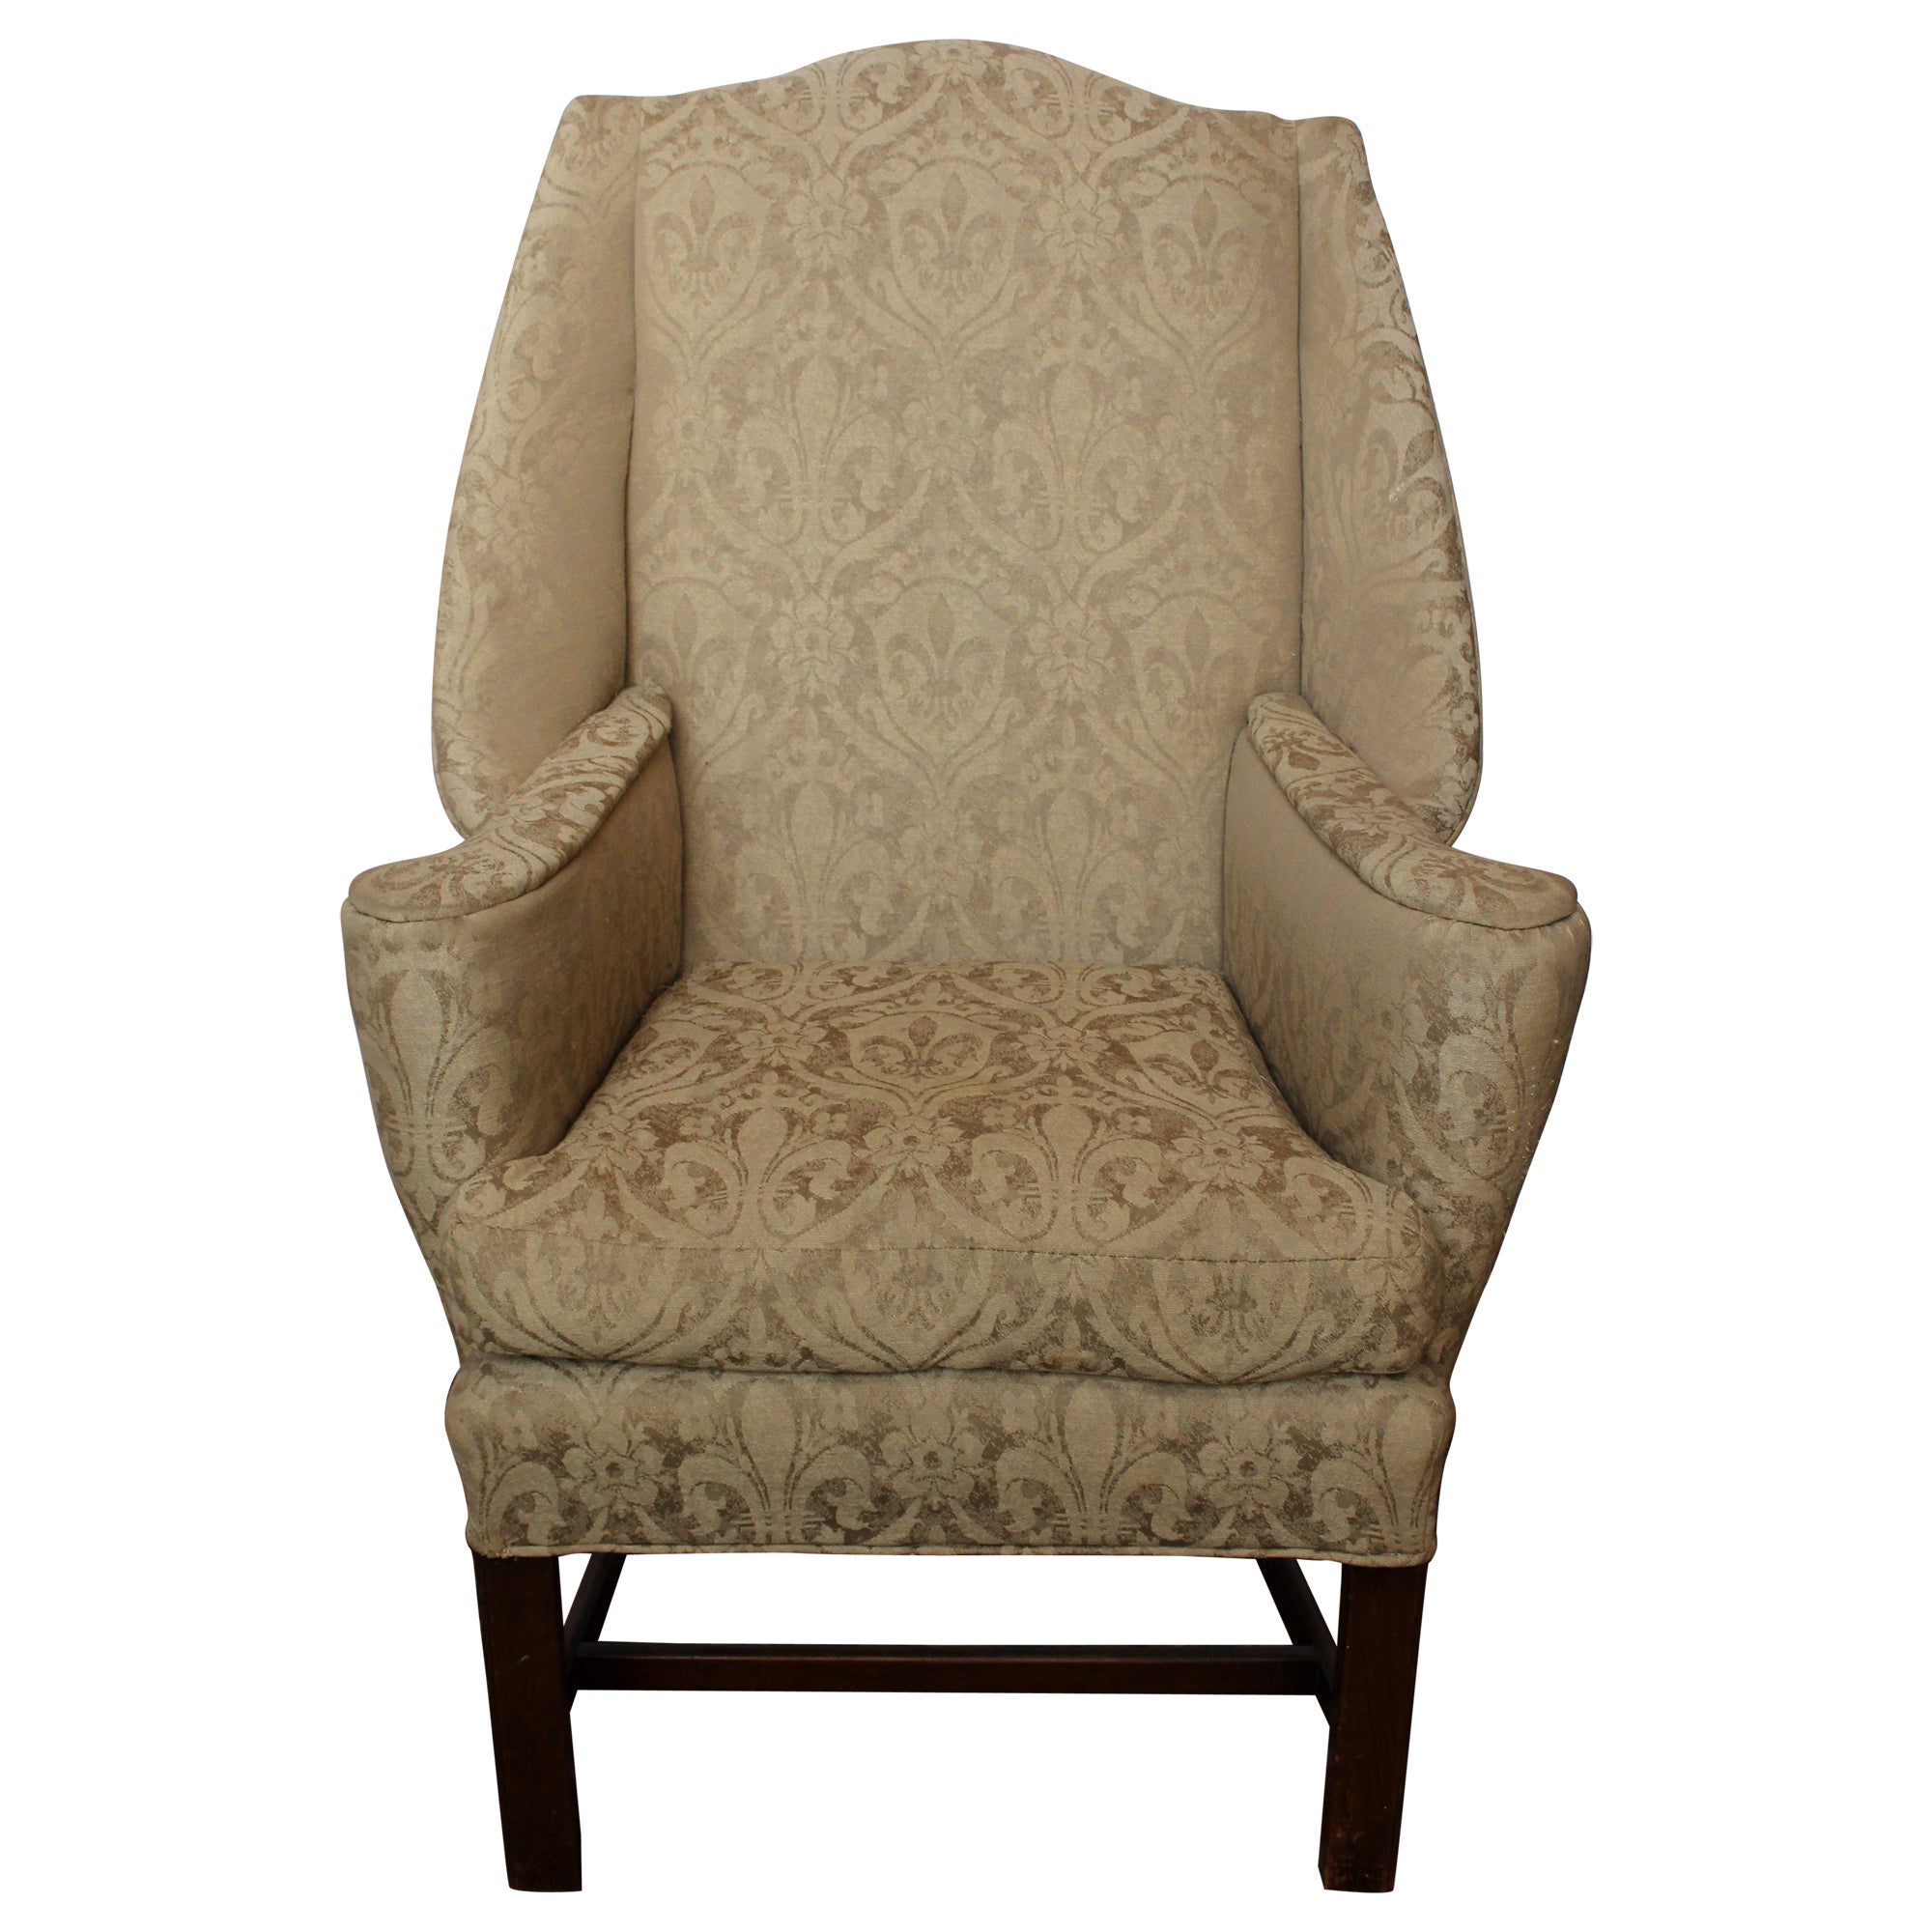 c. 1780 Irish Sleigh Back Wing Chair For Sale